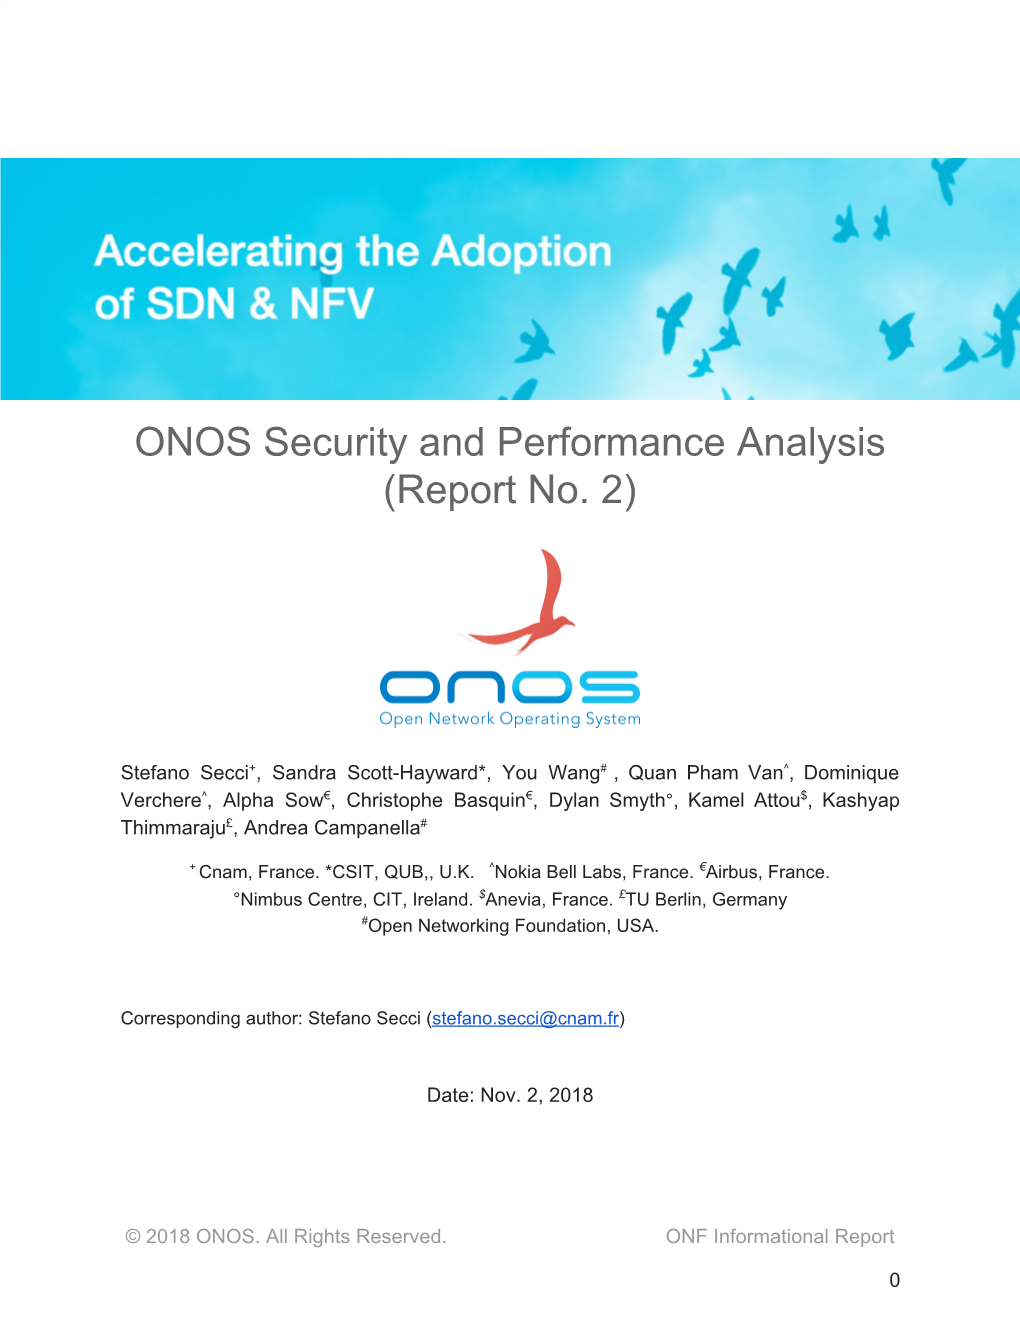 ONOS Security and Performance Analysis (Report No. 2)